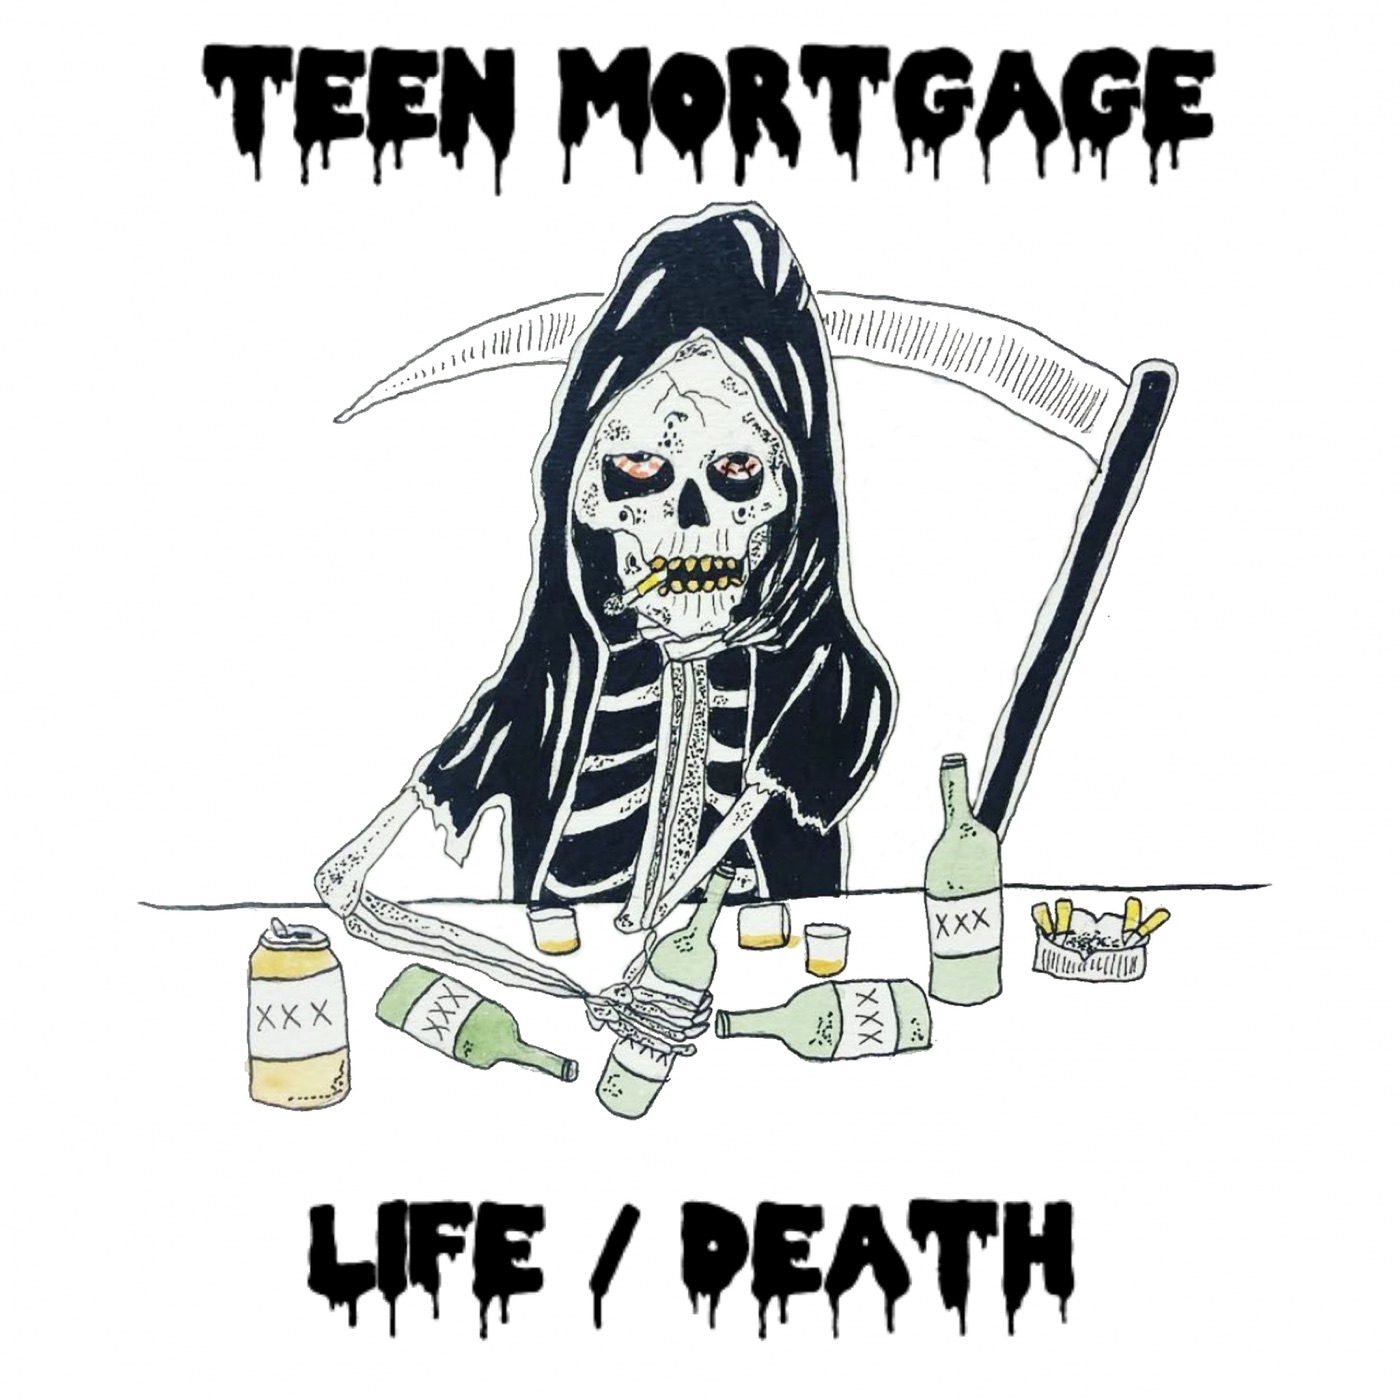 Life/Death by Teen Mortgage